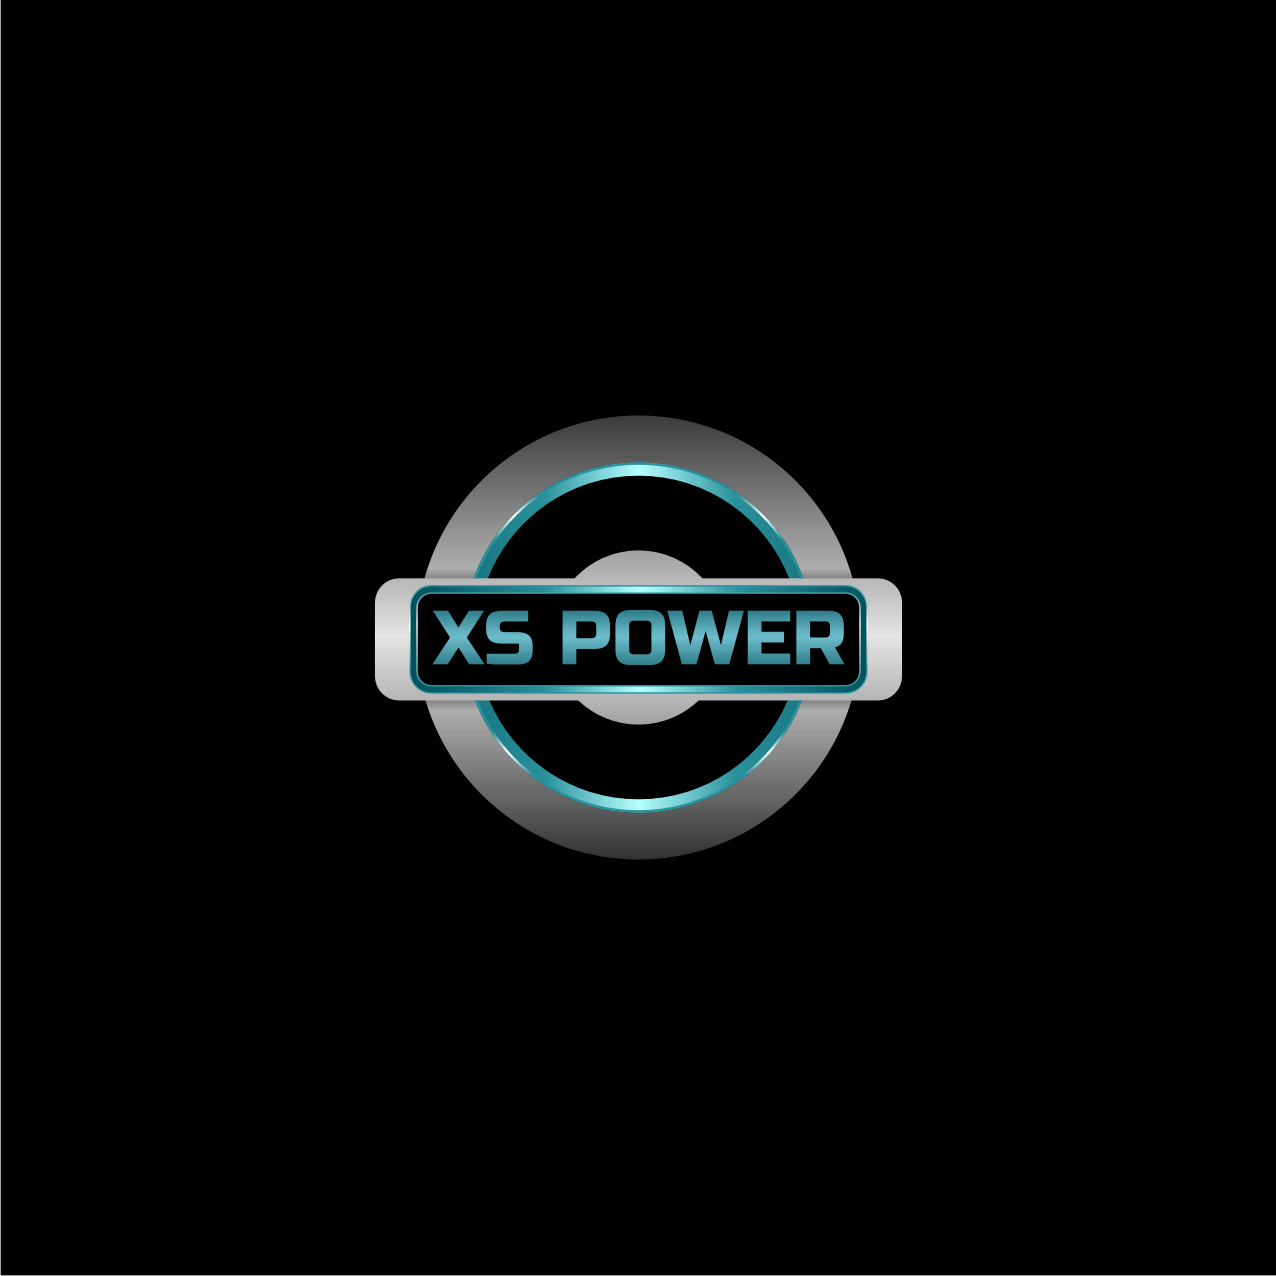 XS Power Logo - Modern, Upmarket, Cell Phone Logo Design for XS Power by Qi2designs ...